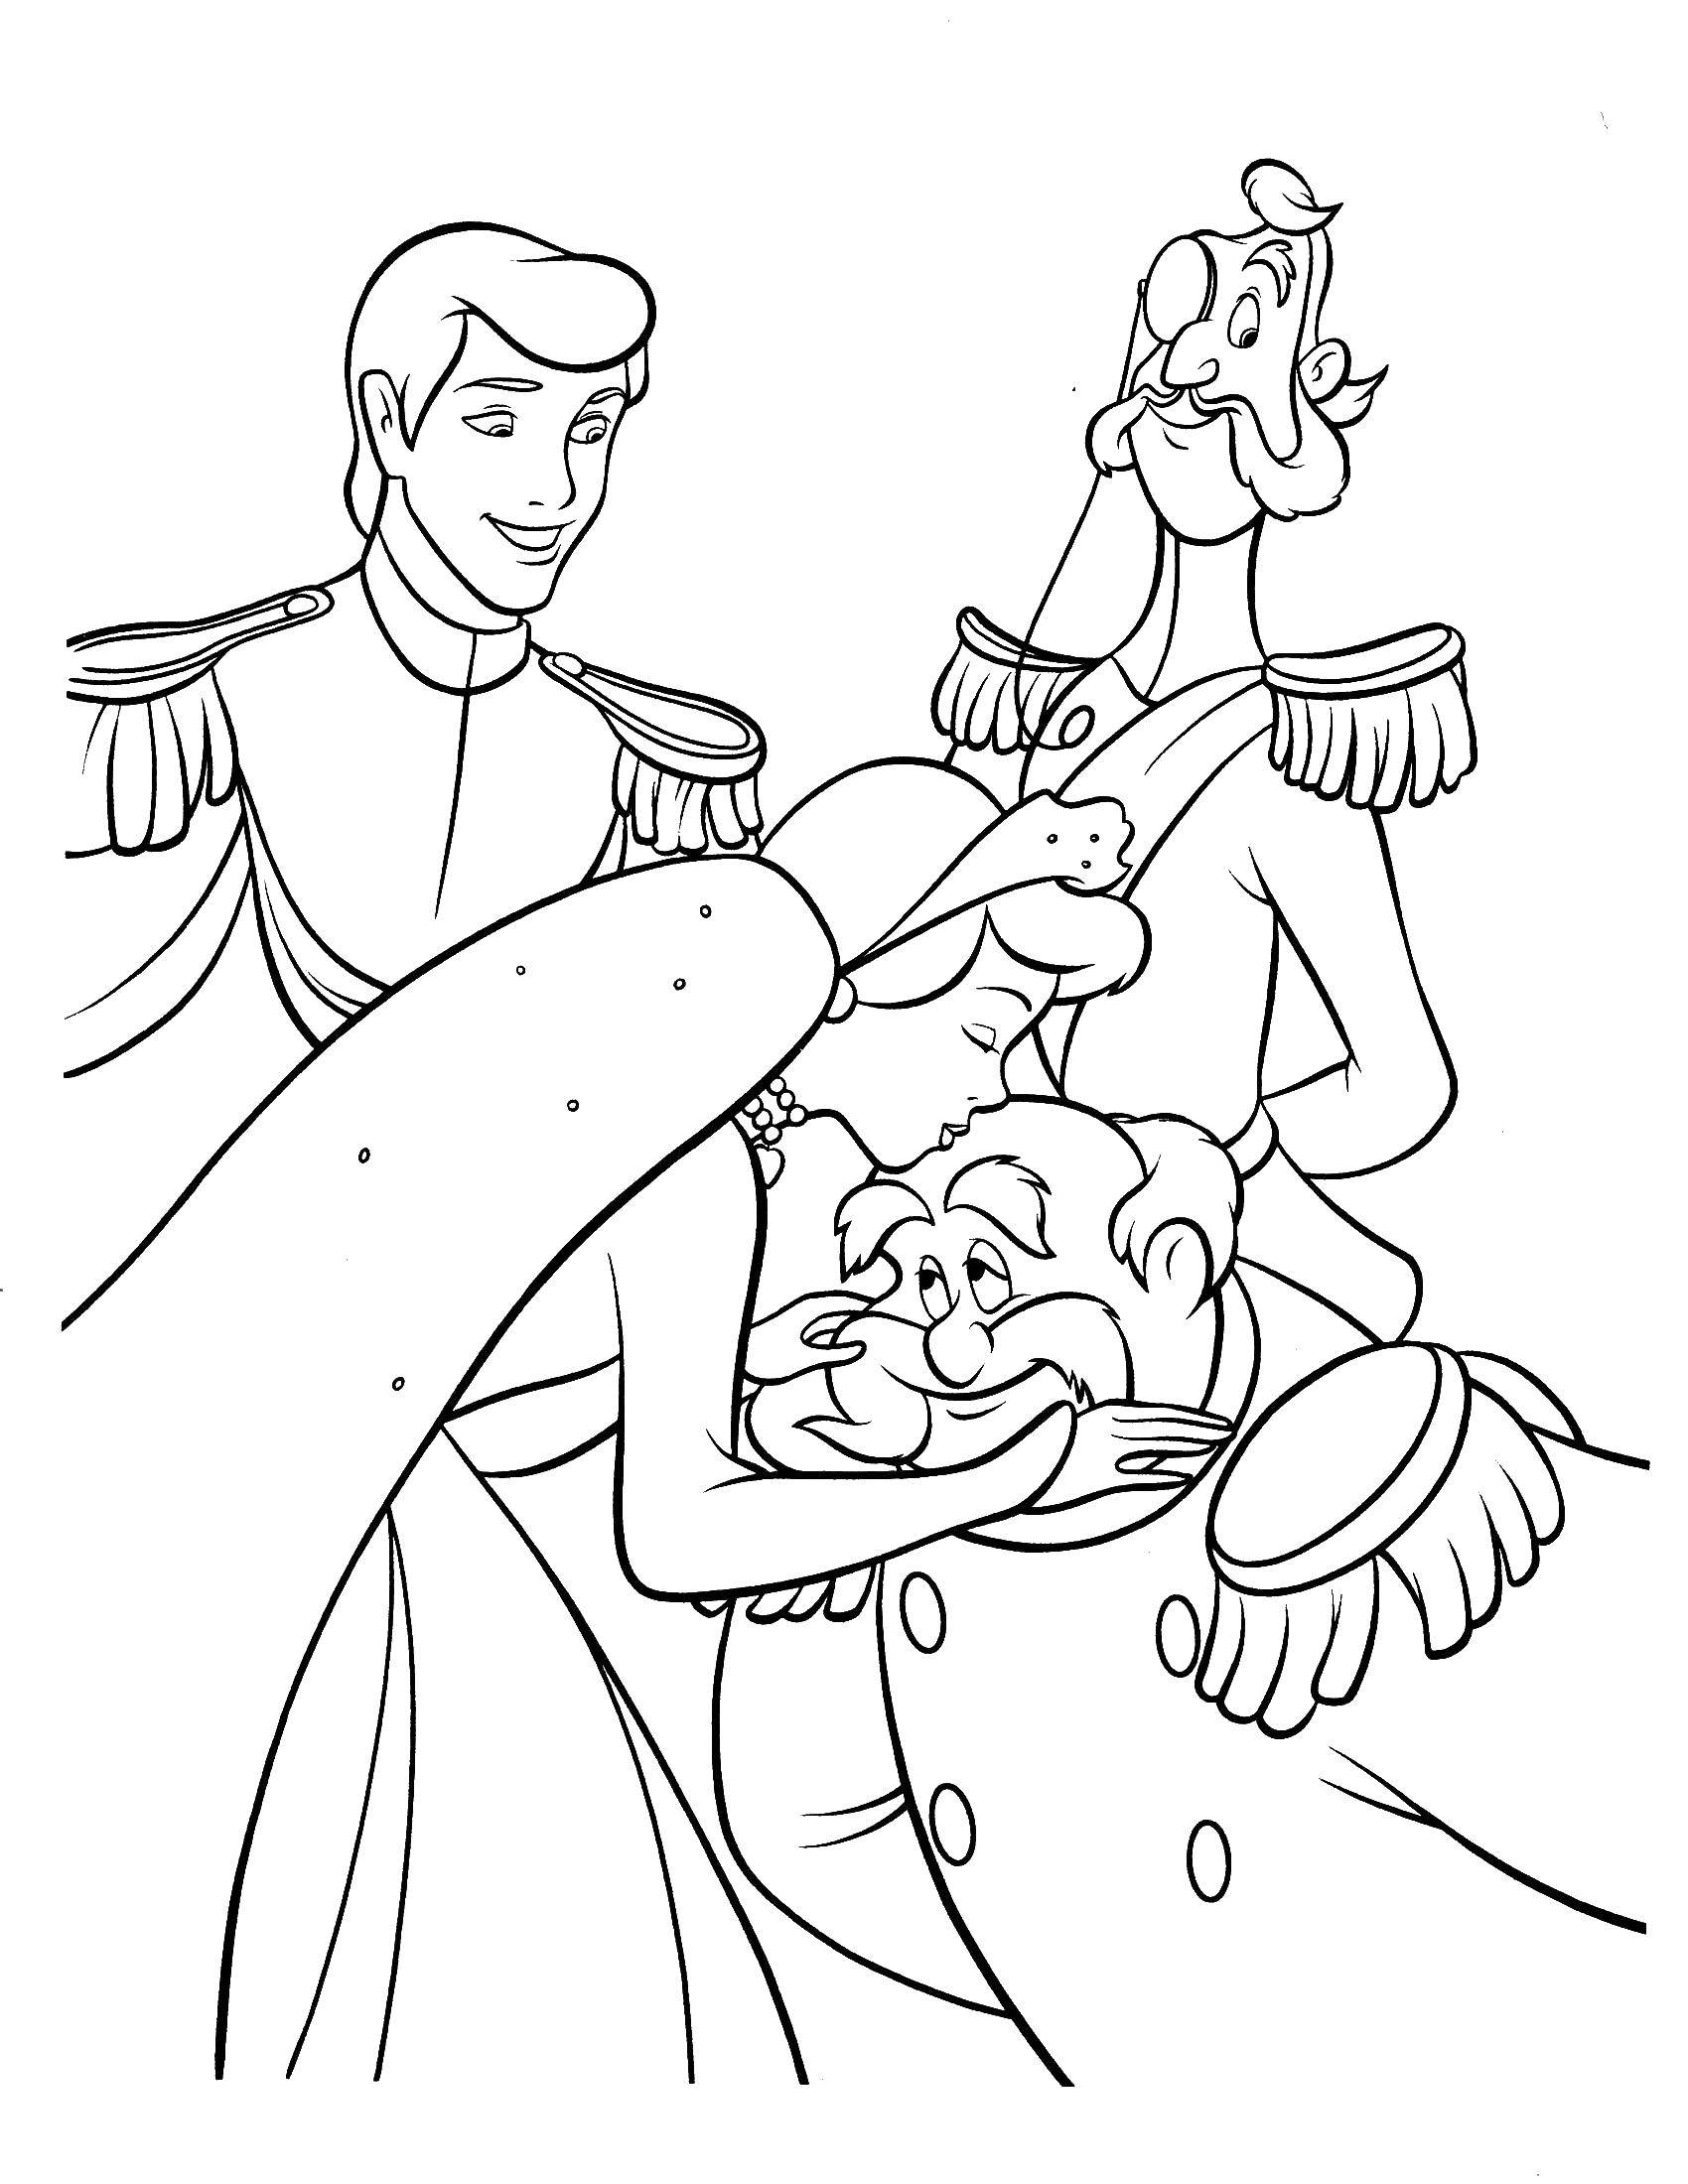 Coloring Cinderella kisses the king. Category Cinderella and the Prince. Tags:  Cinderella.